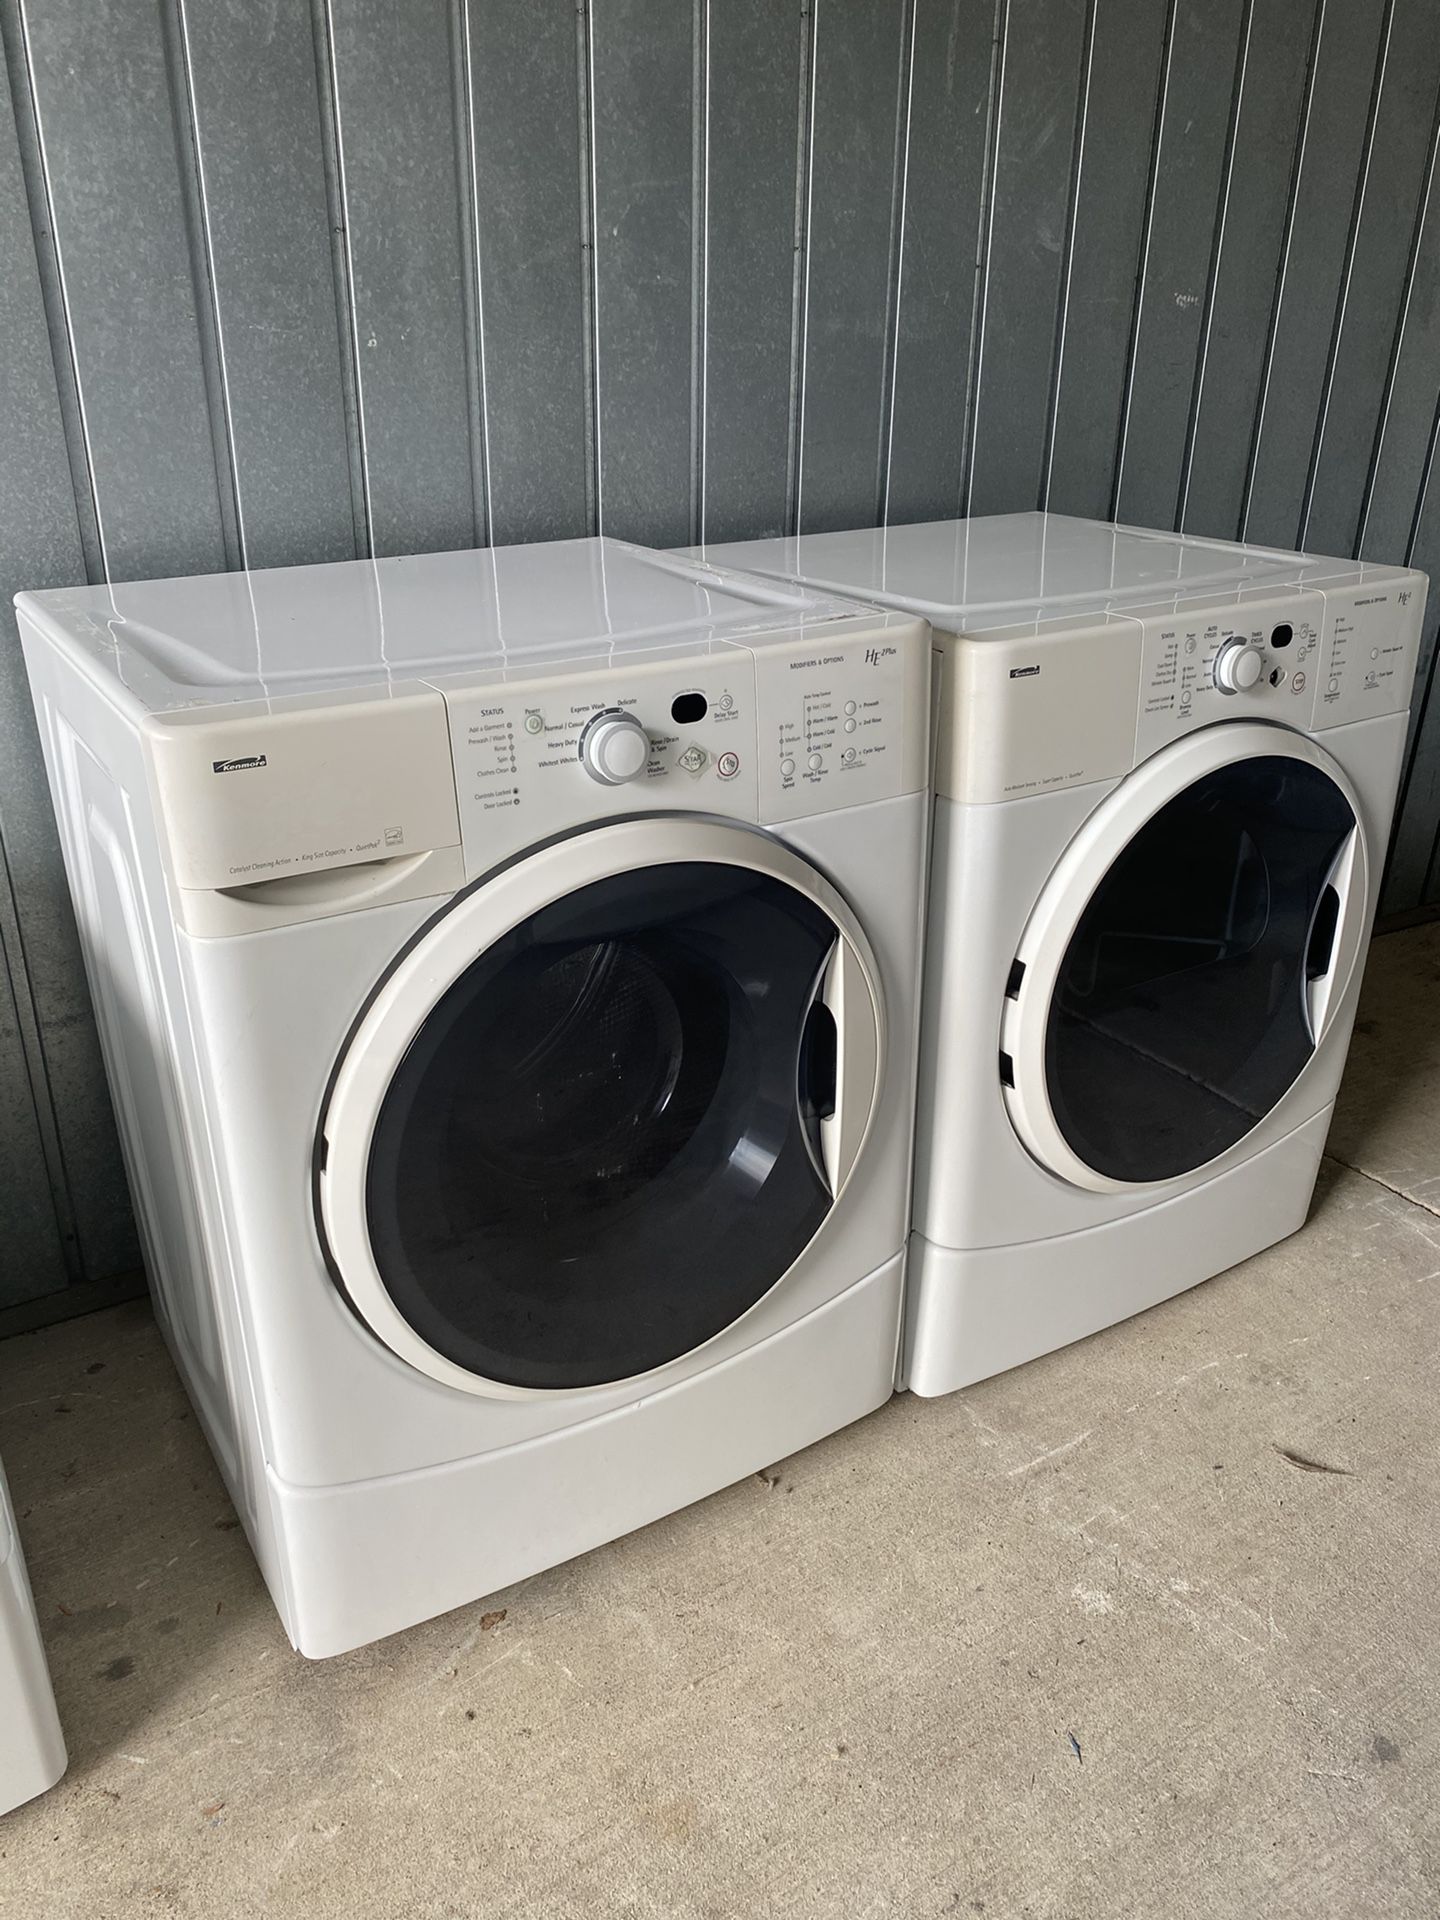 Kenmore washer and dryer 225 each